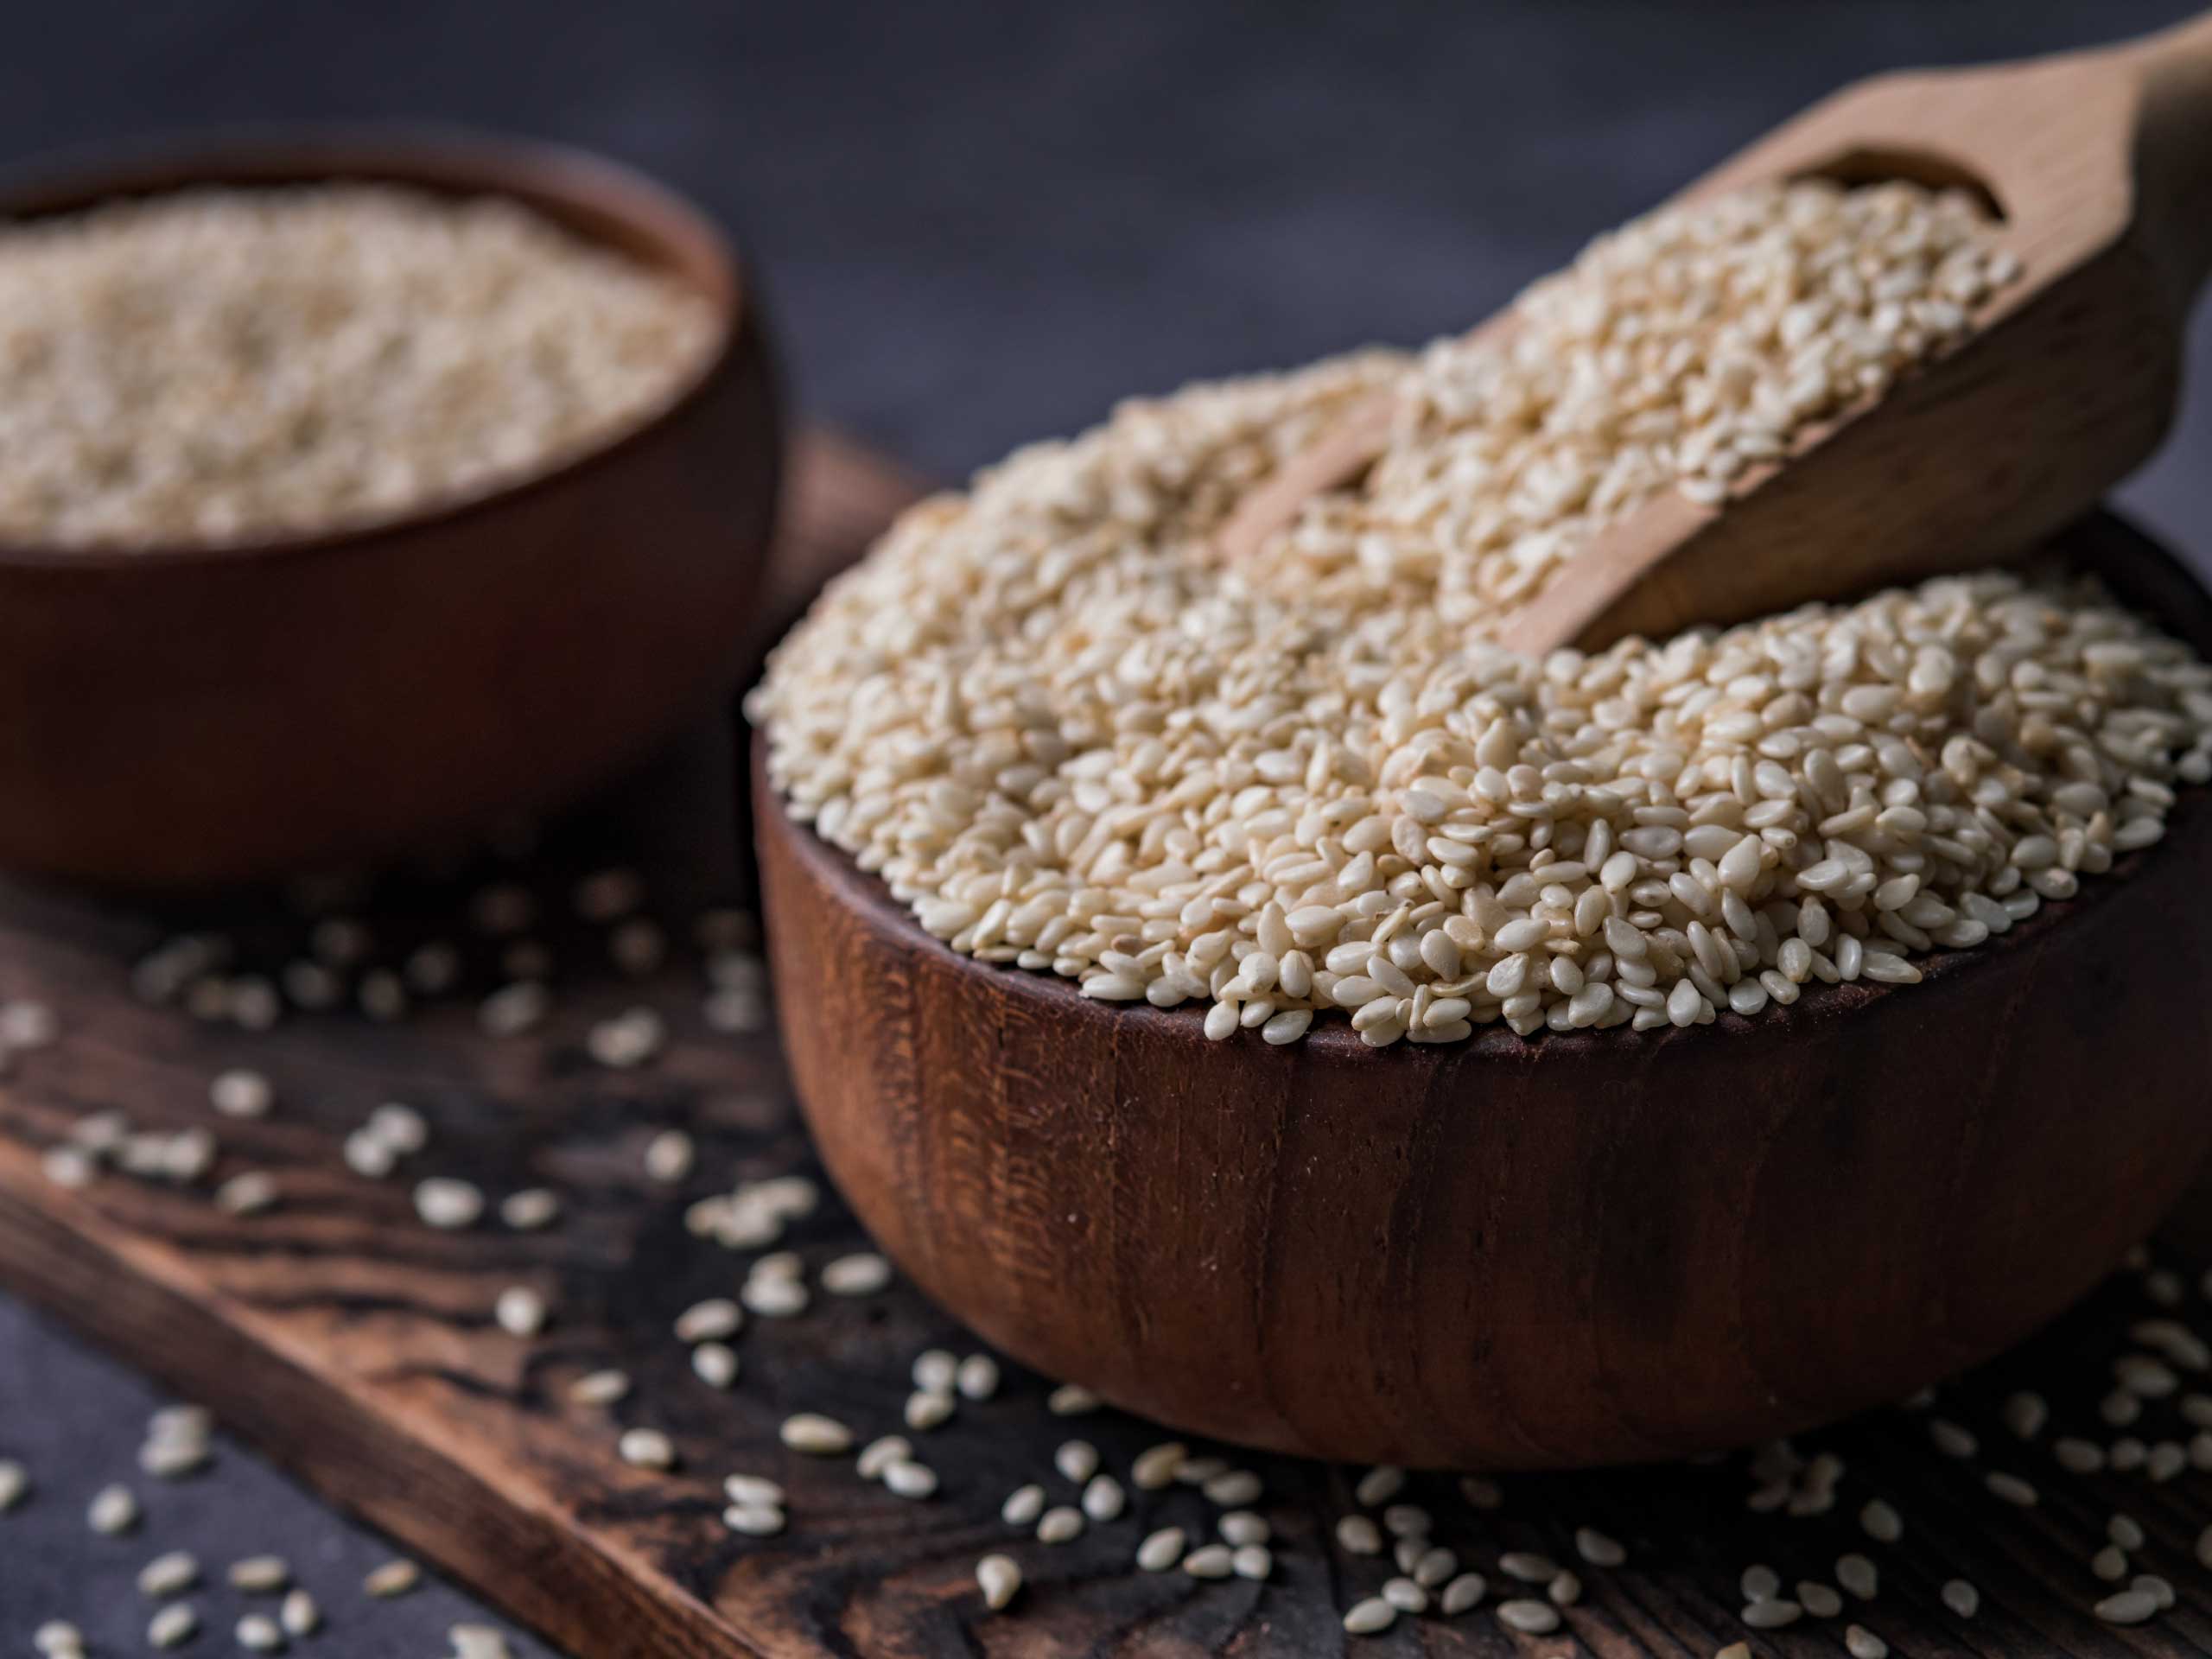 White Sesame Seeds Suppliers in Ahmedabad, Gujarat, India